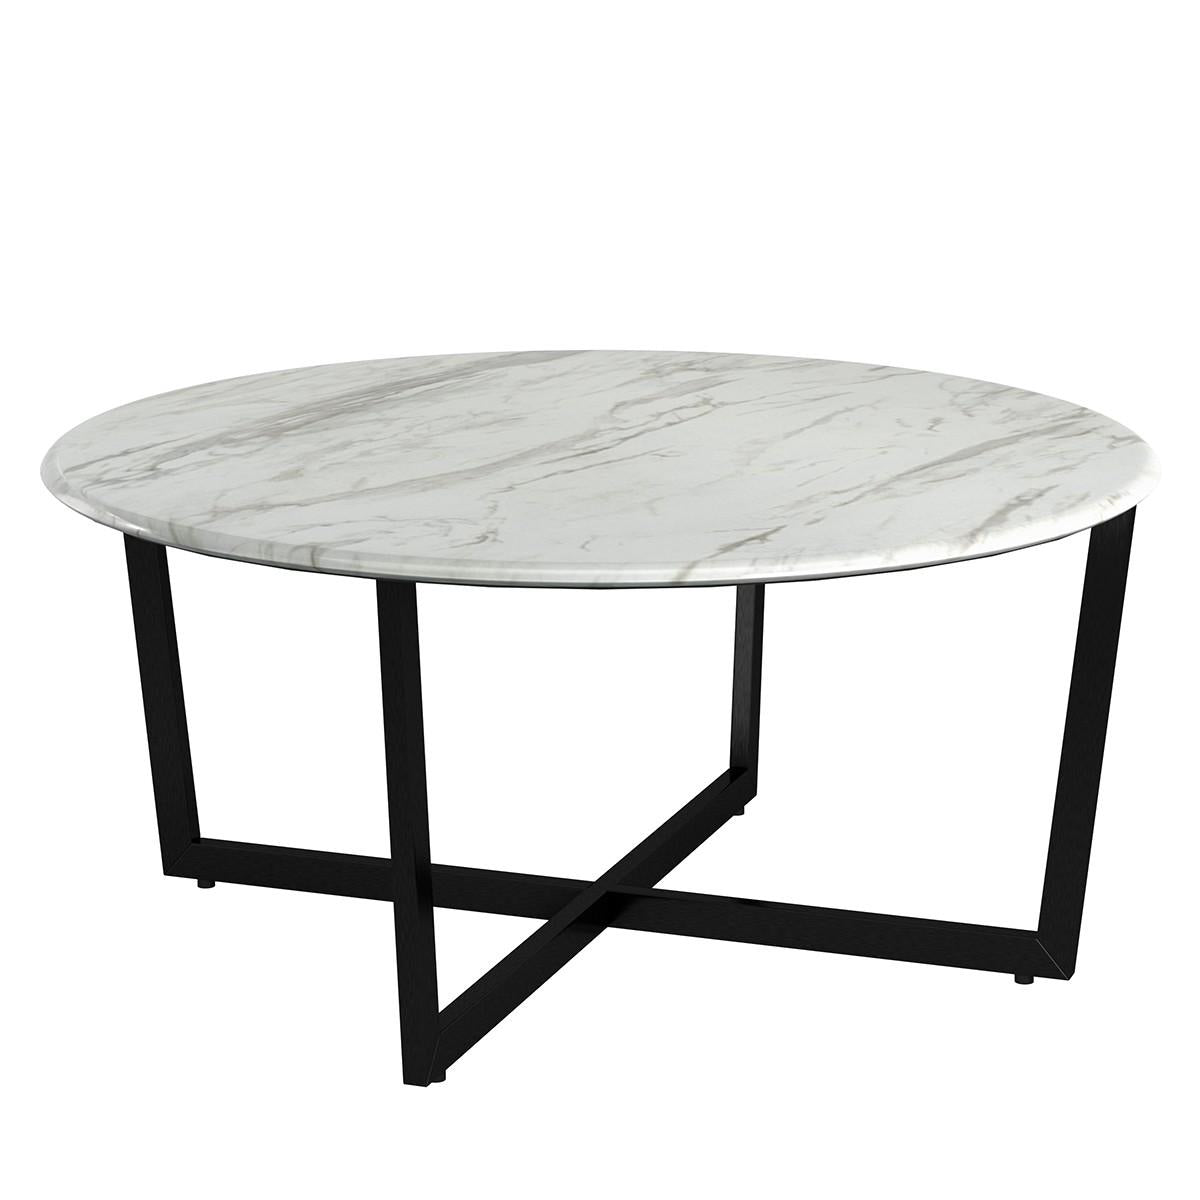 White on Black Faux Marble Round Coffee Table